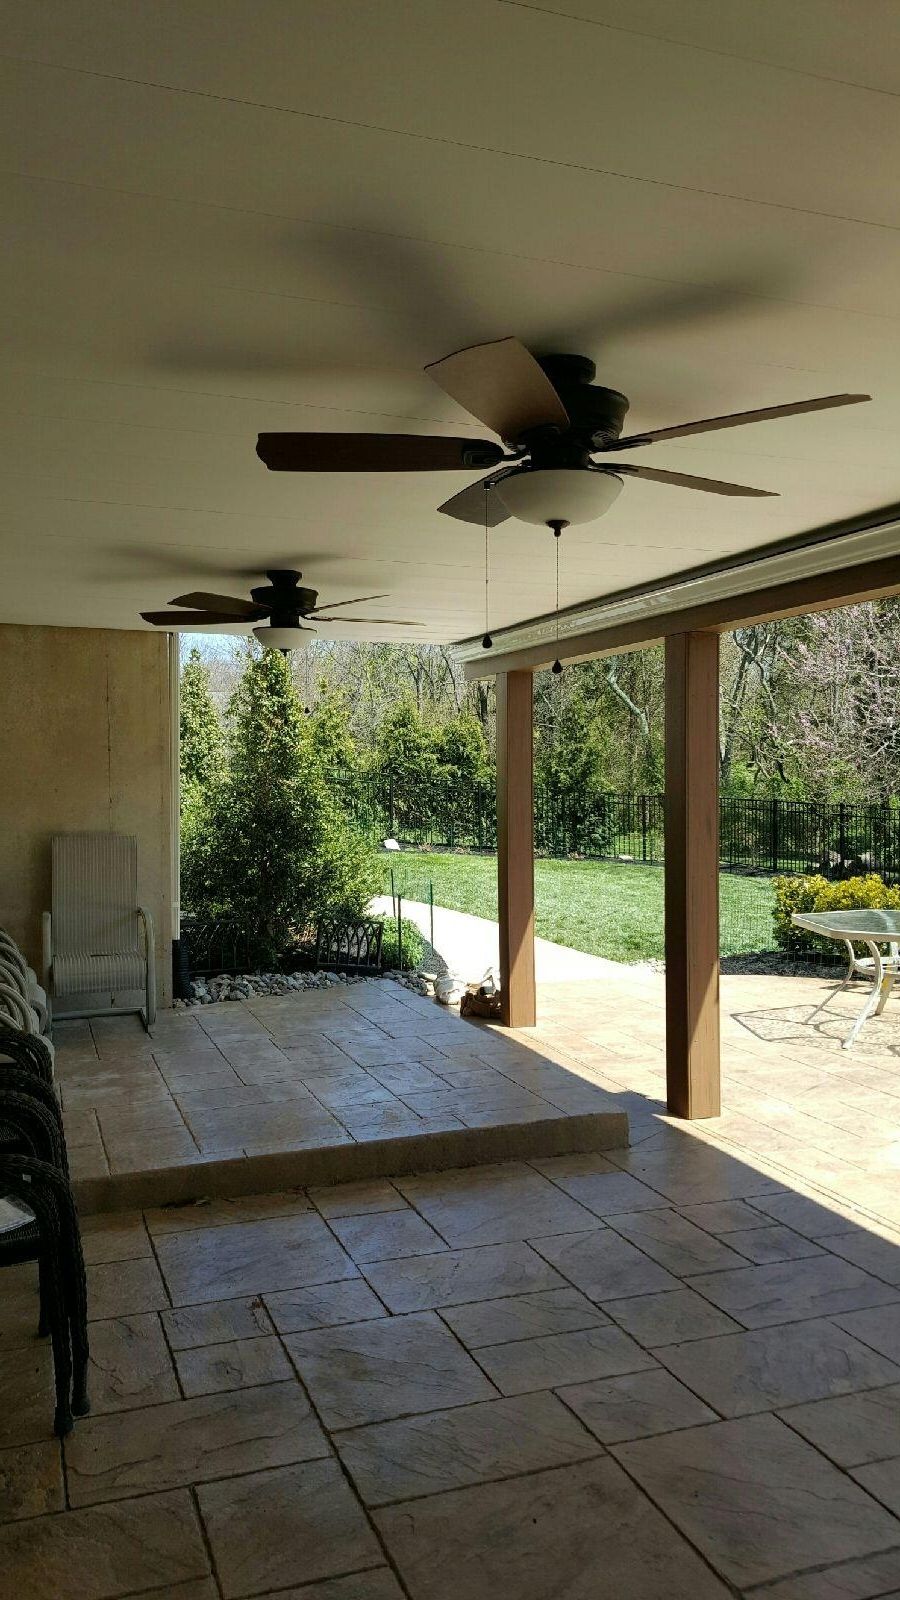 Waterproof Outdoor Ceiling Fans Throughout Well Known Ceiling Fan: Breathtaking Outdoor Ceiling Fans For Home Waterproof (View 6 of 20)